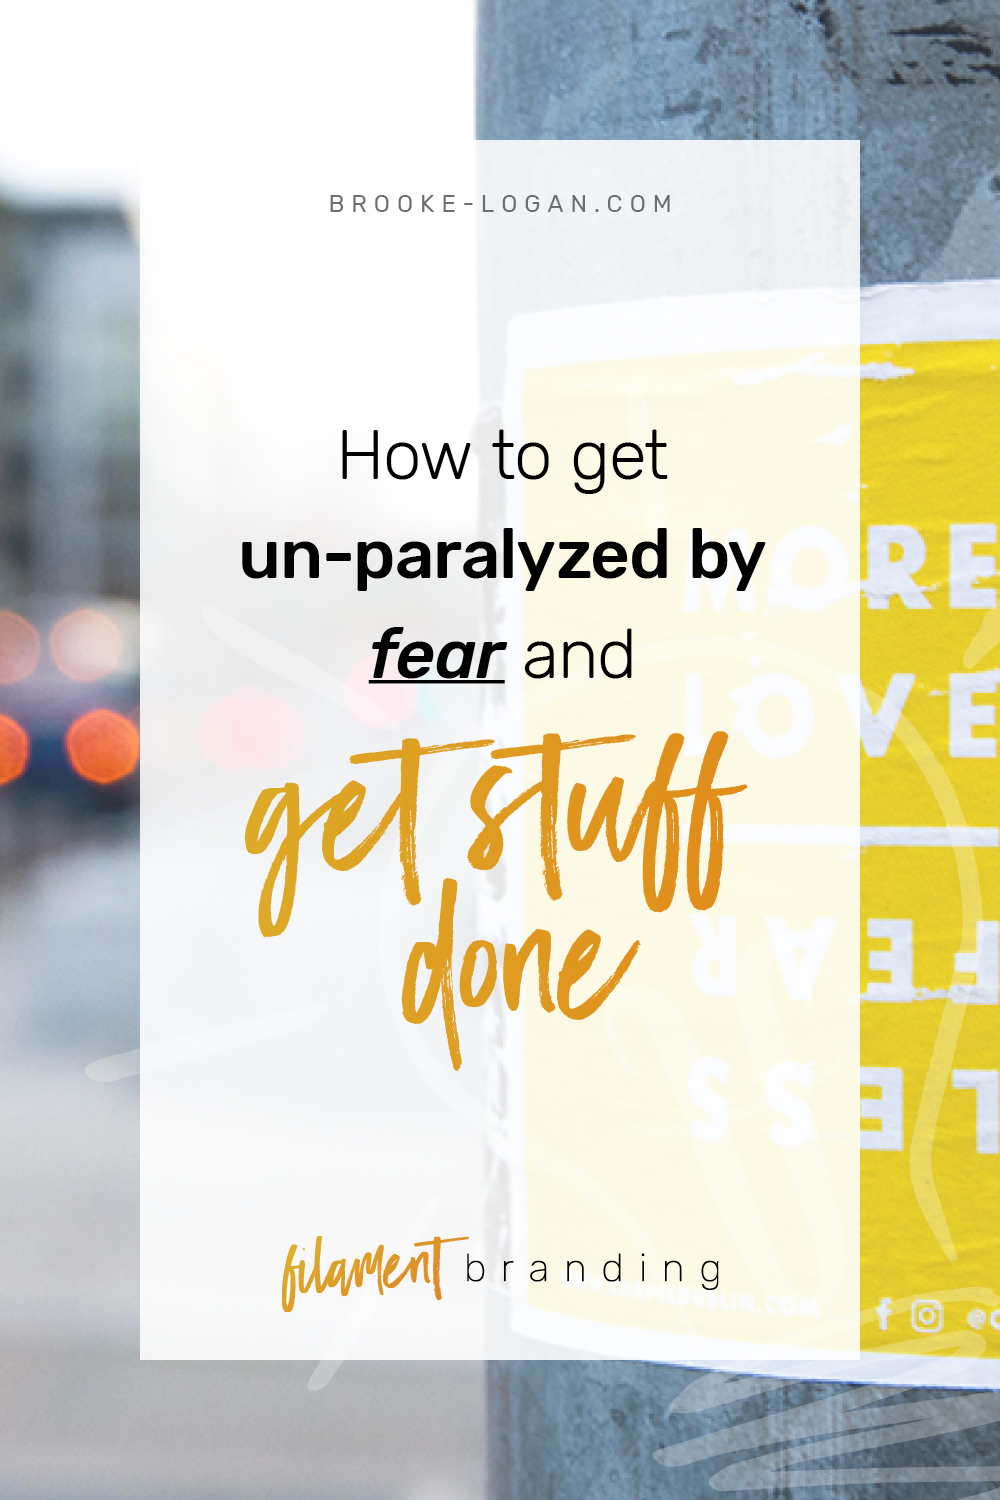 Ep 4: How to get un-paralyzed by fear and get stuff done